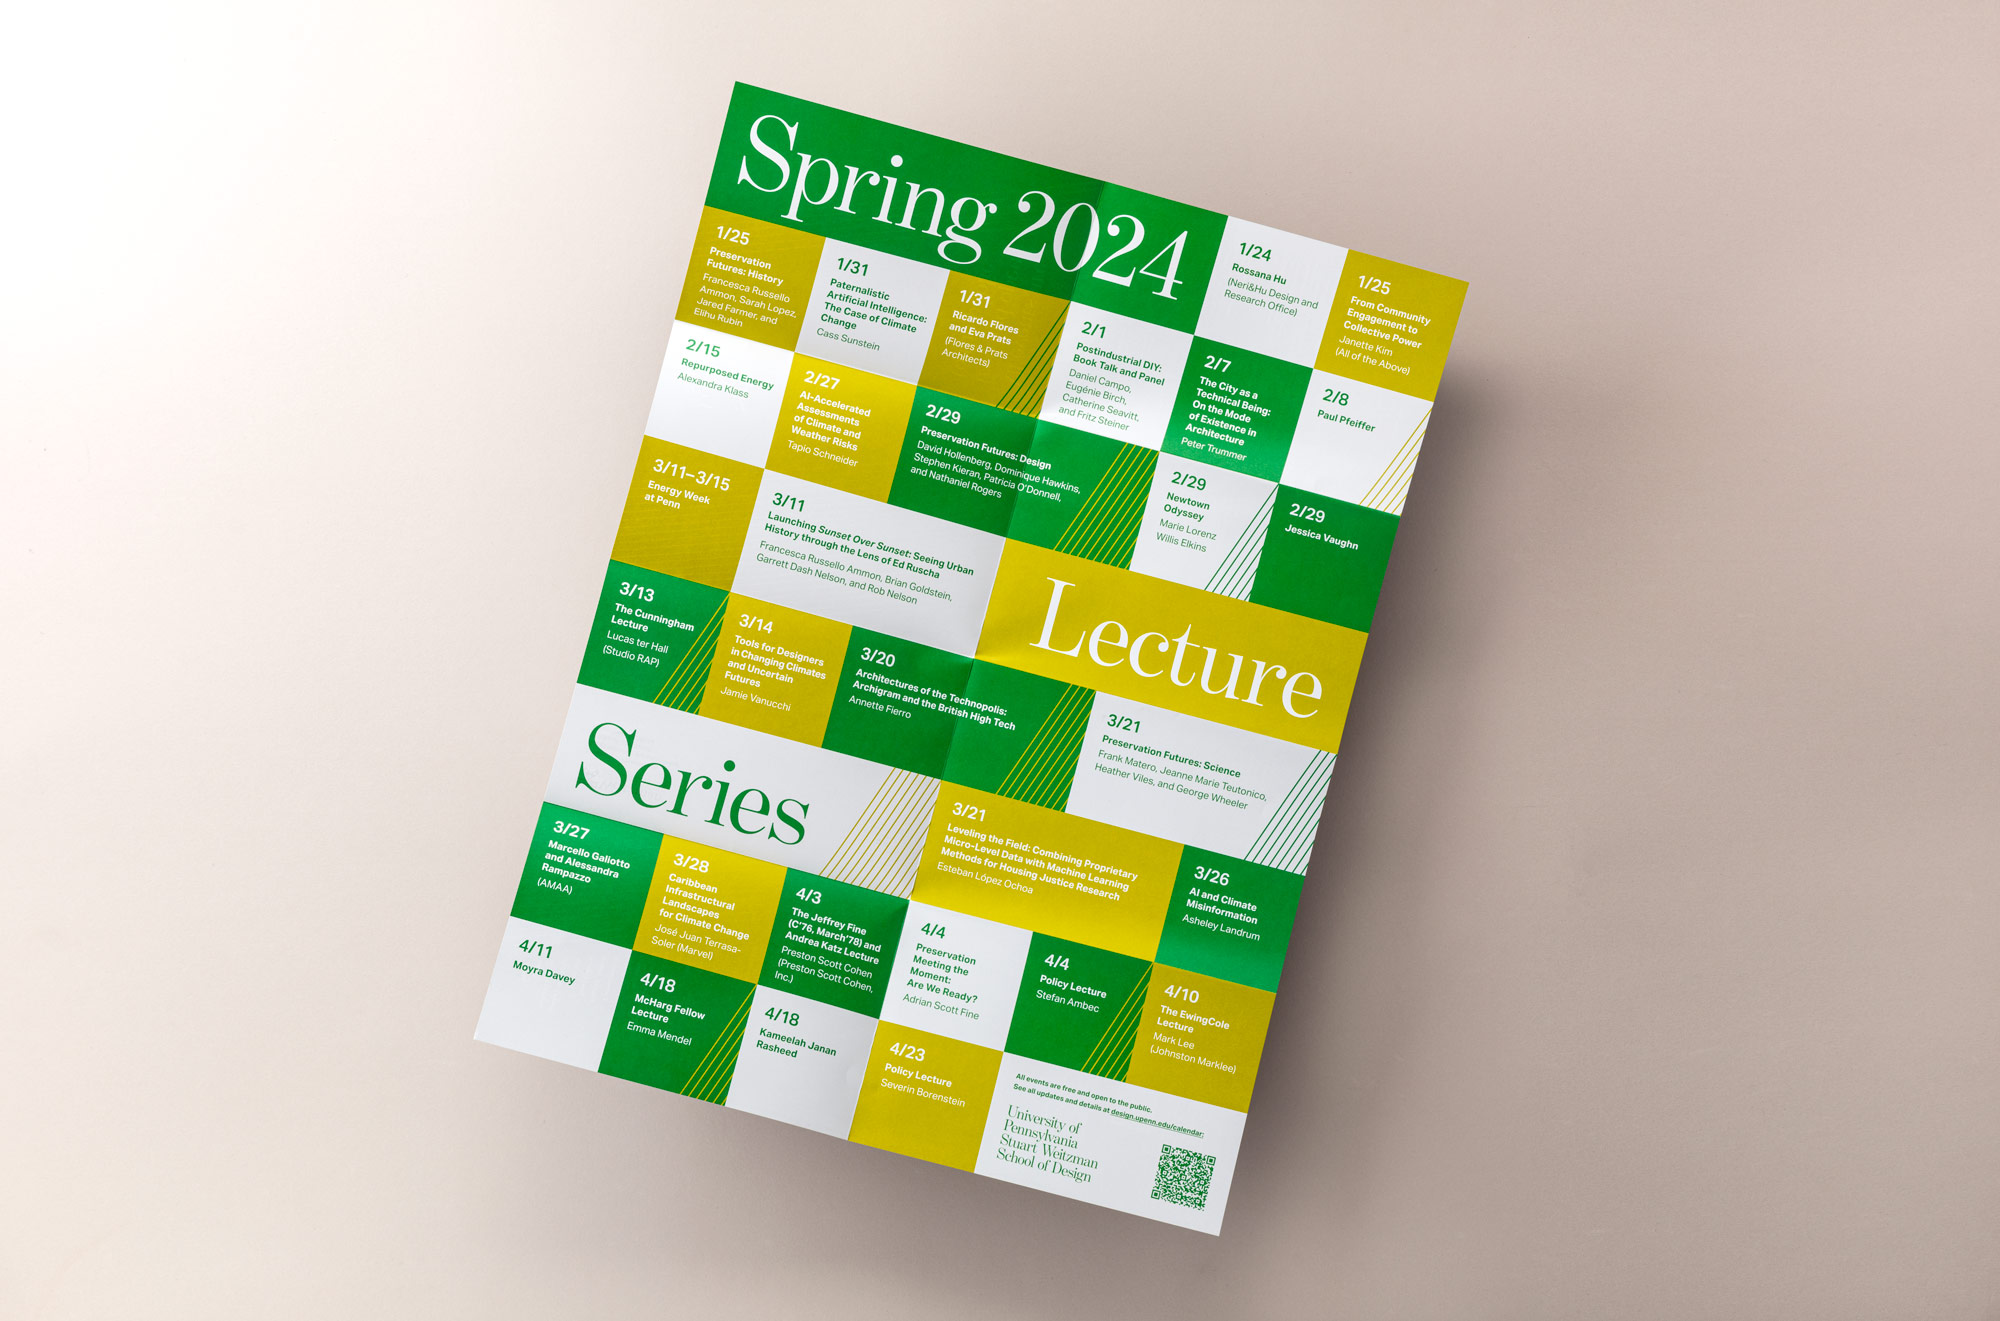 Spring 2024 Lecture Series Poster unfolded